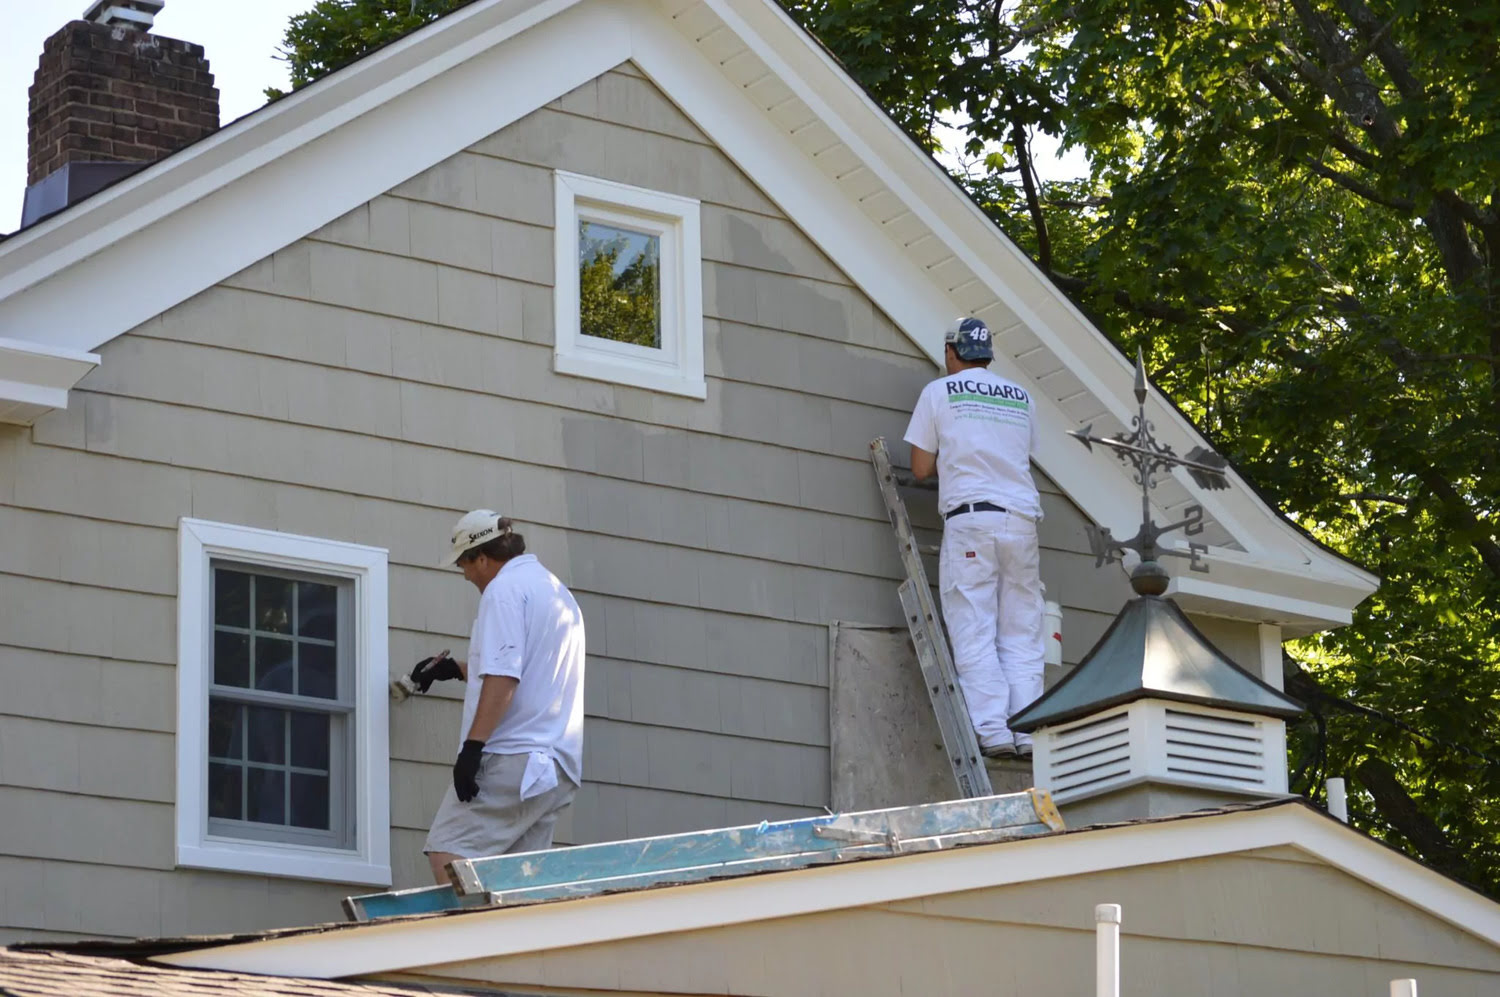 How Often To Paint A House Exterior, According To Pros